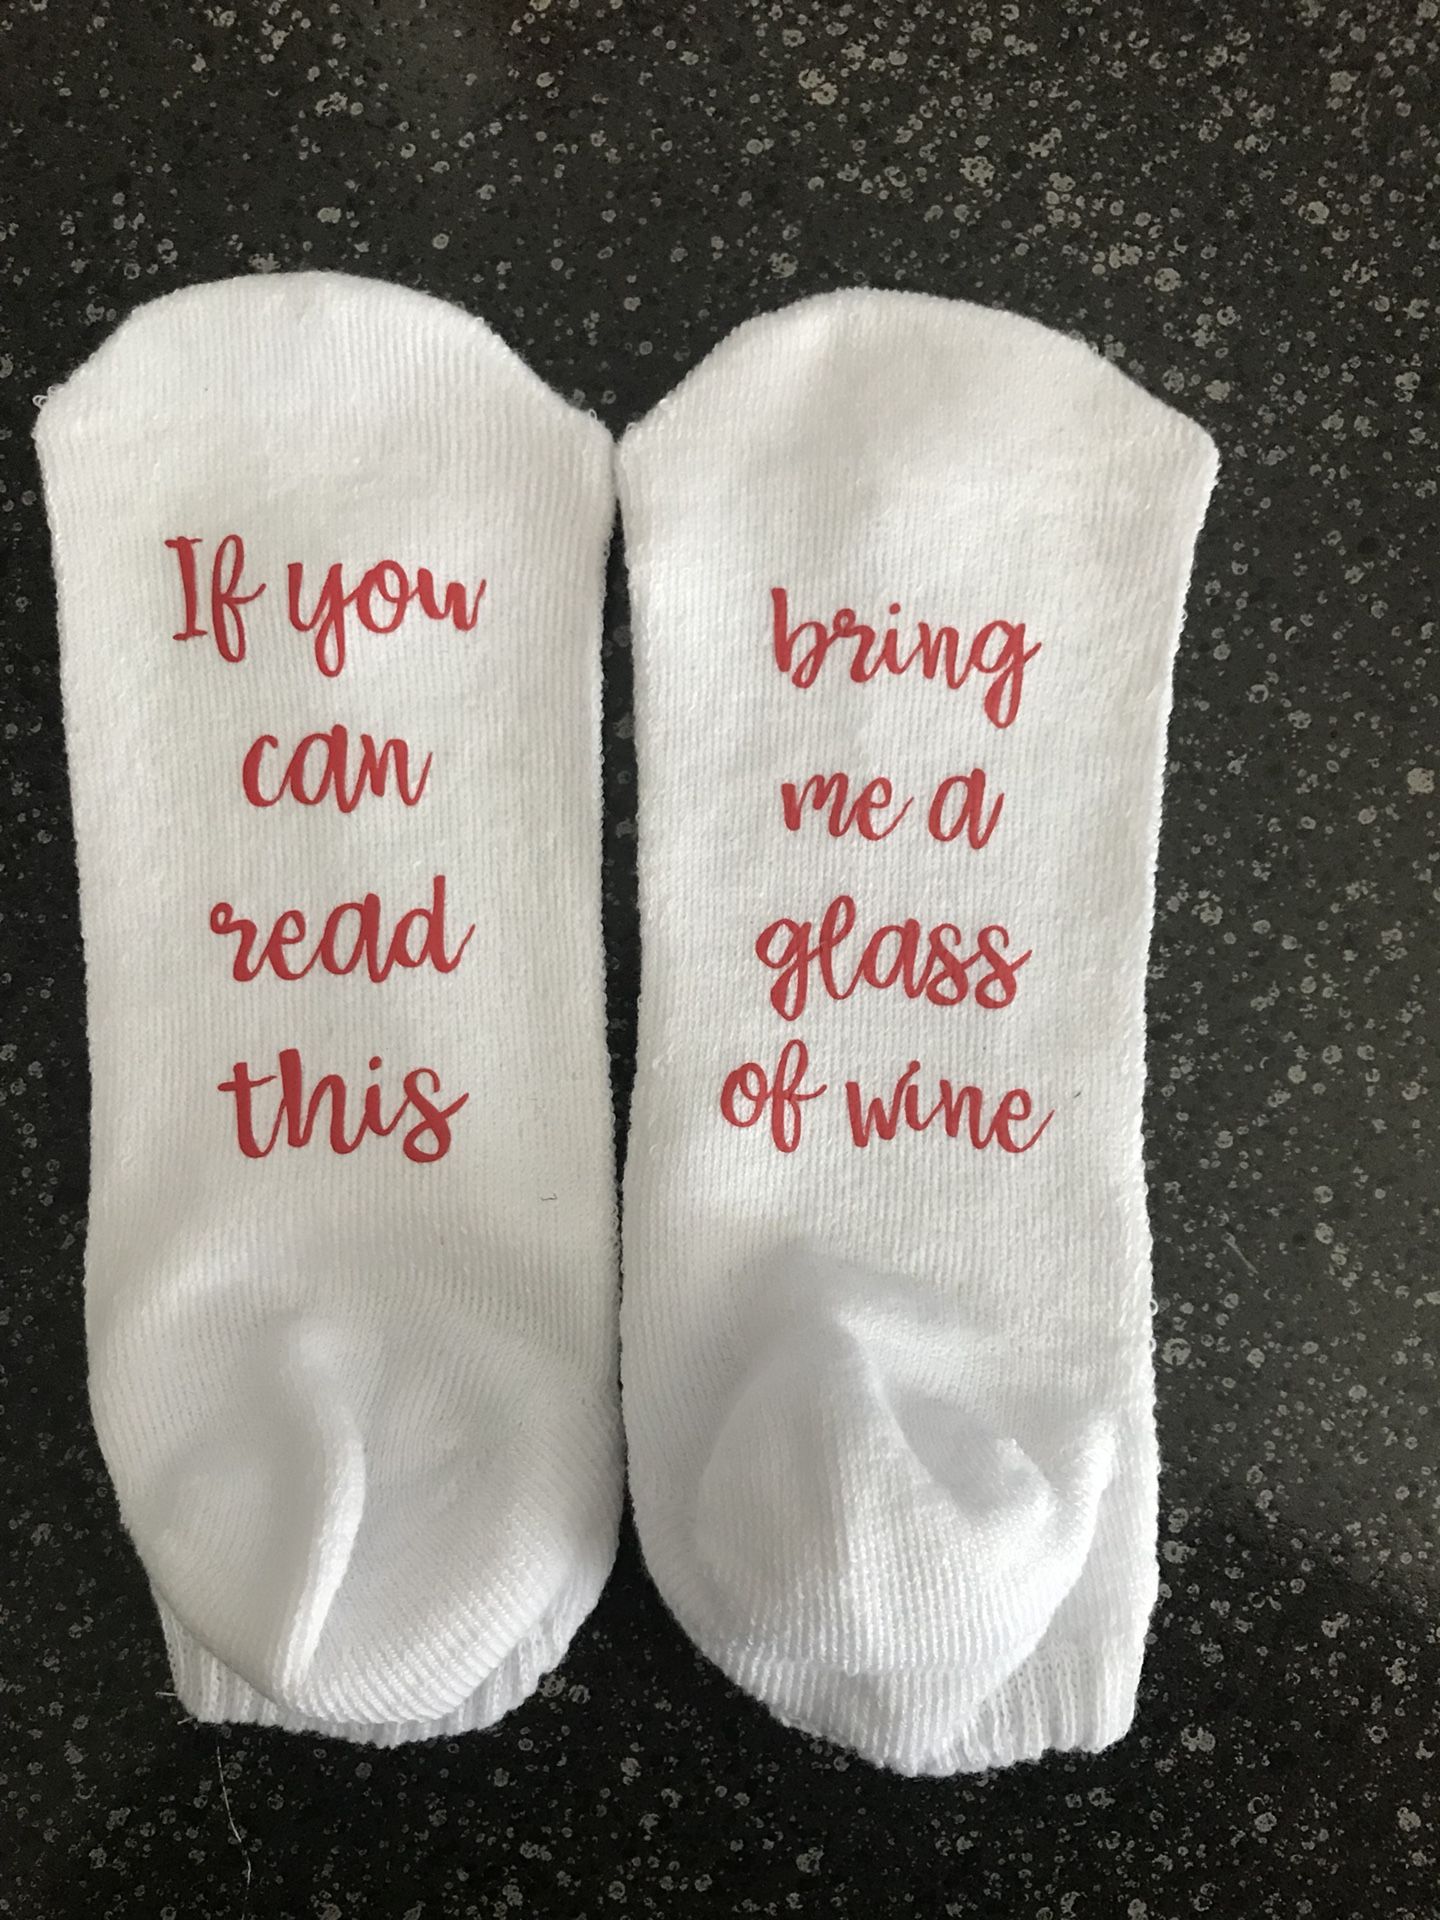 Socks - if you can read this bring me a glass of wine